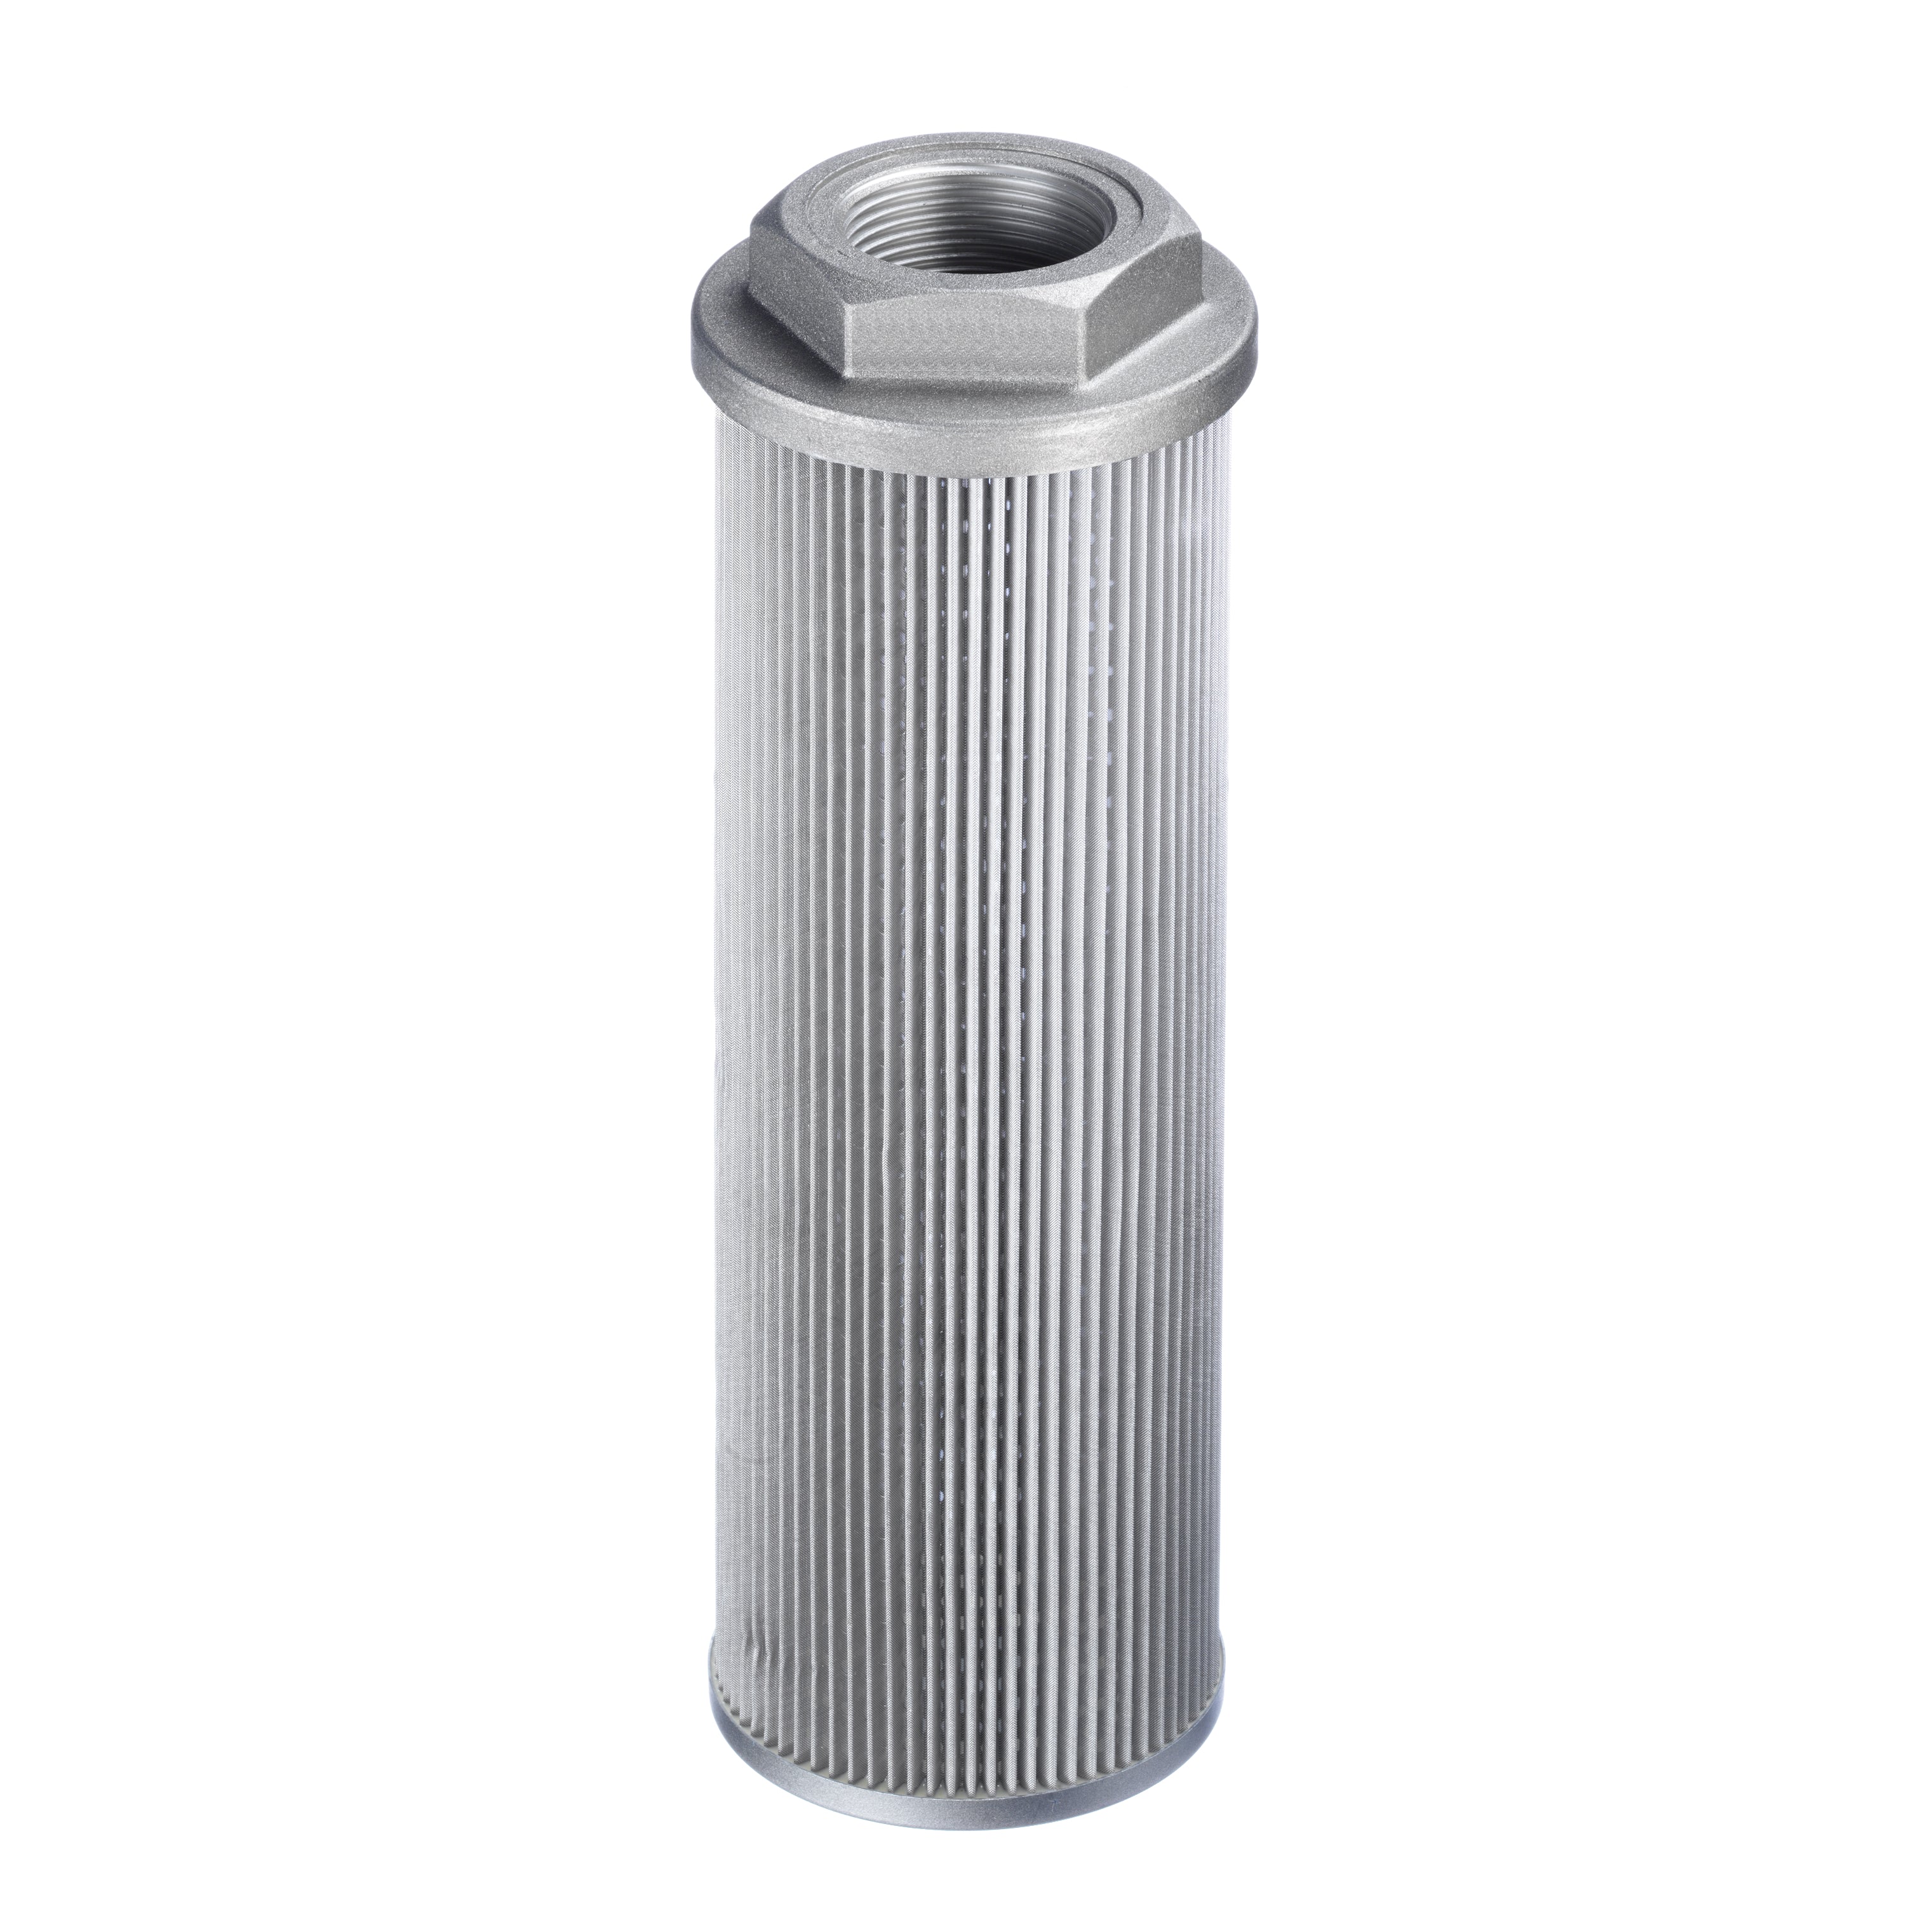 SUS-088-N32-260-125-A-B0.2 : Stauff Suction Strainer, Aluminum End Cap, 2" NPT, 59.8GPM, 125 Micron, 3psi Bypass